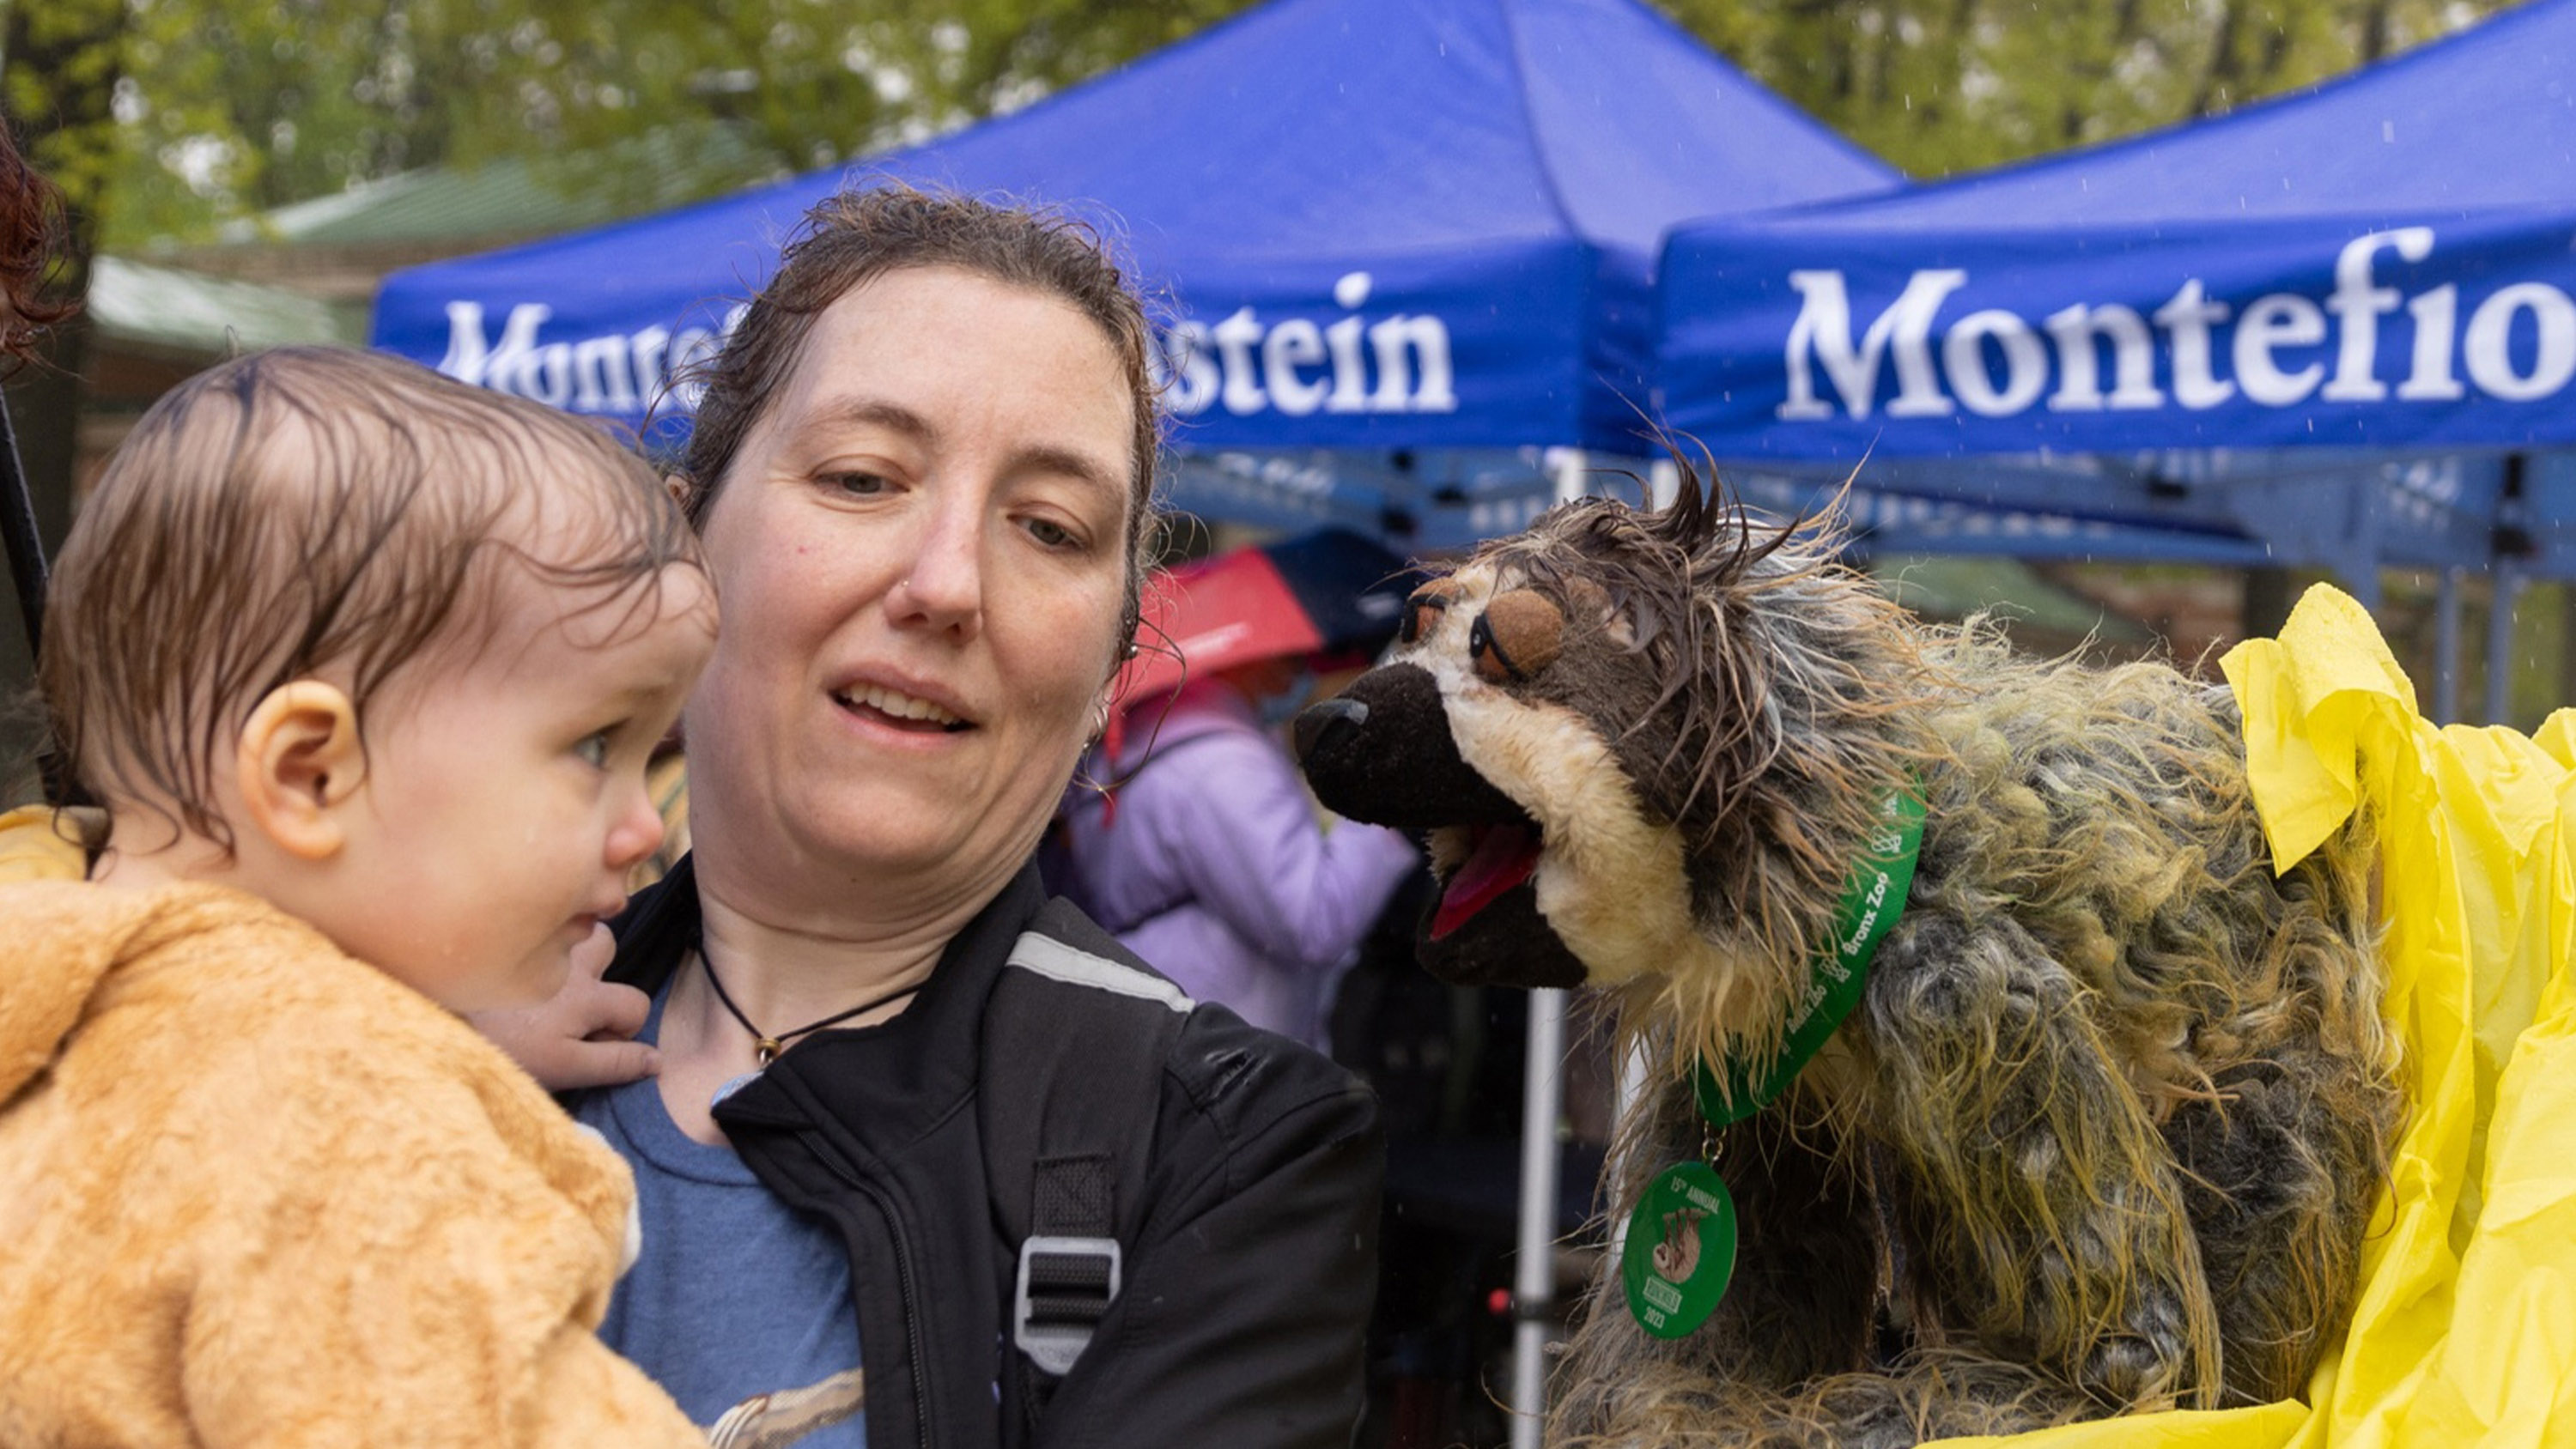 A baby delightedly meets a sloth puppet.